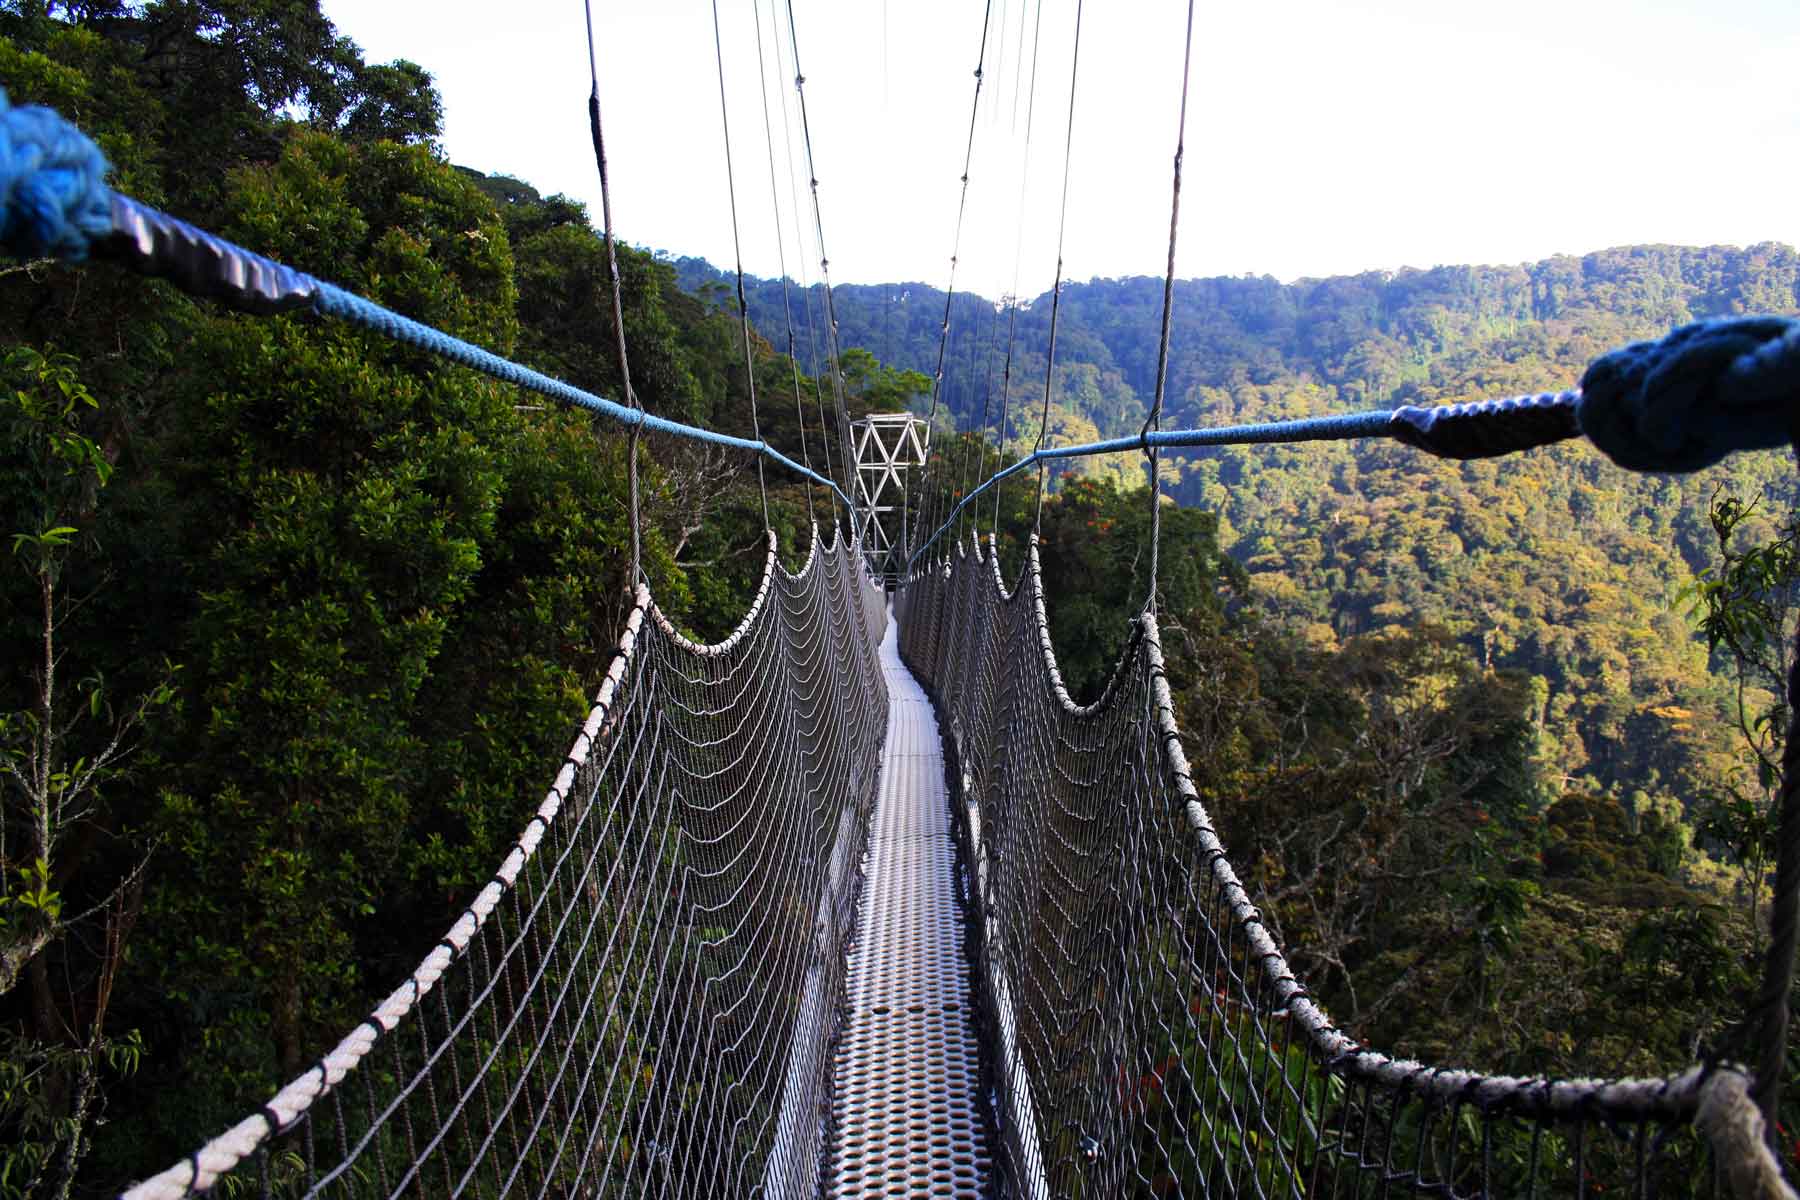 Canopy Walk Experience at Nyungwe Forest